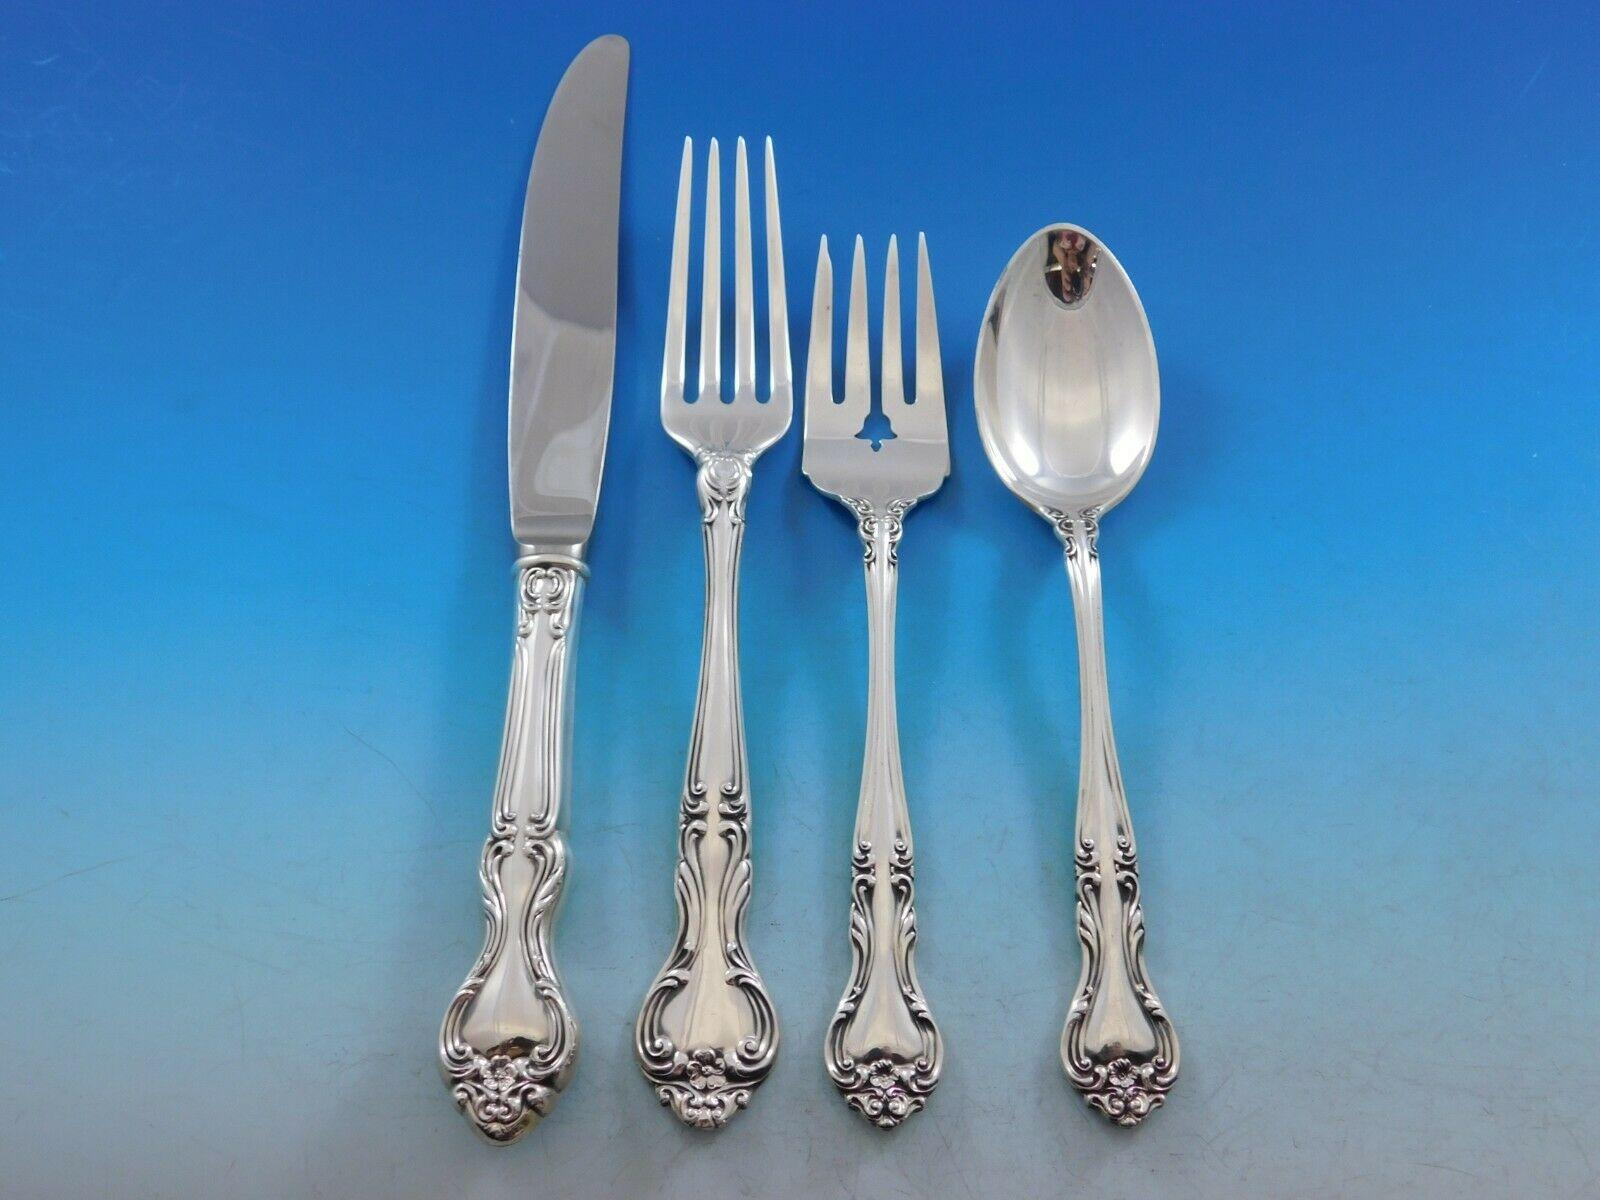 Fabulous Amaryllis by Manchester sterling silver flatware set - 60 pieces. This set includes:



6 Knives, 8 3/4